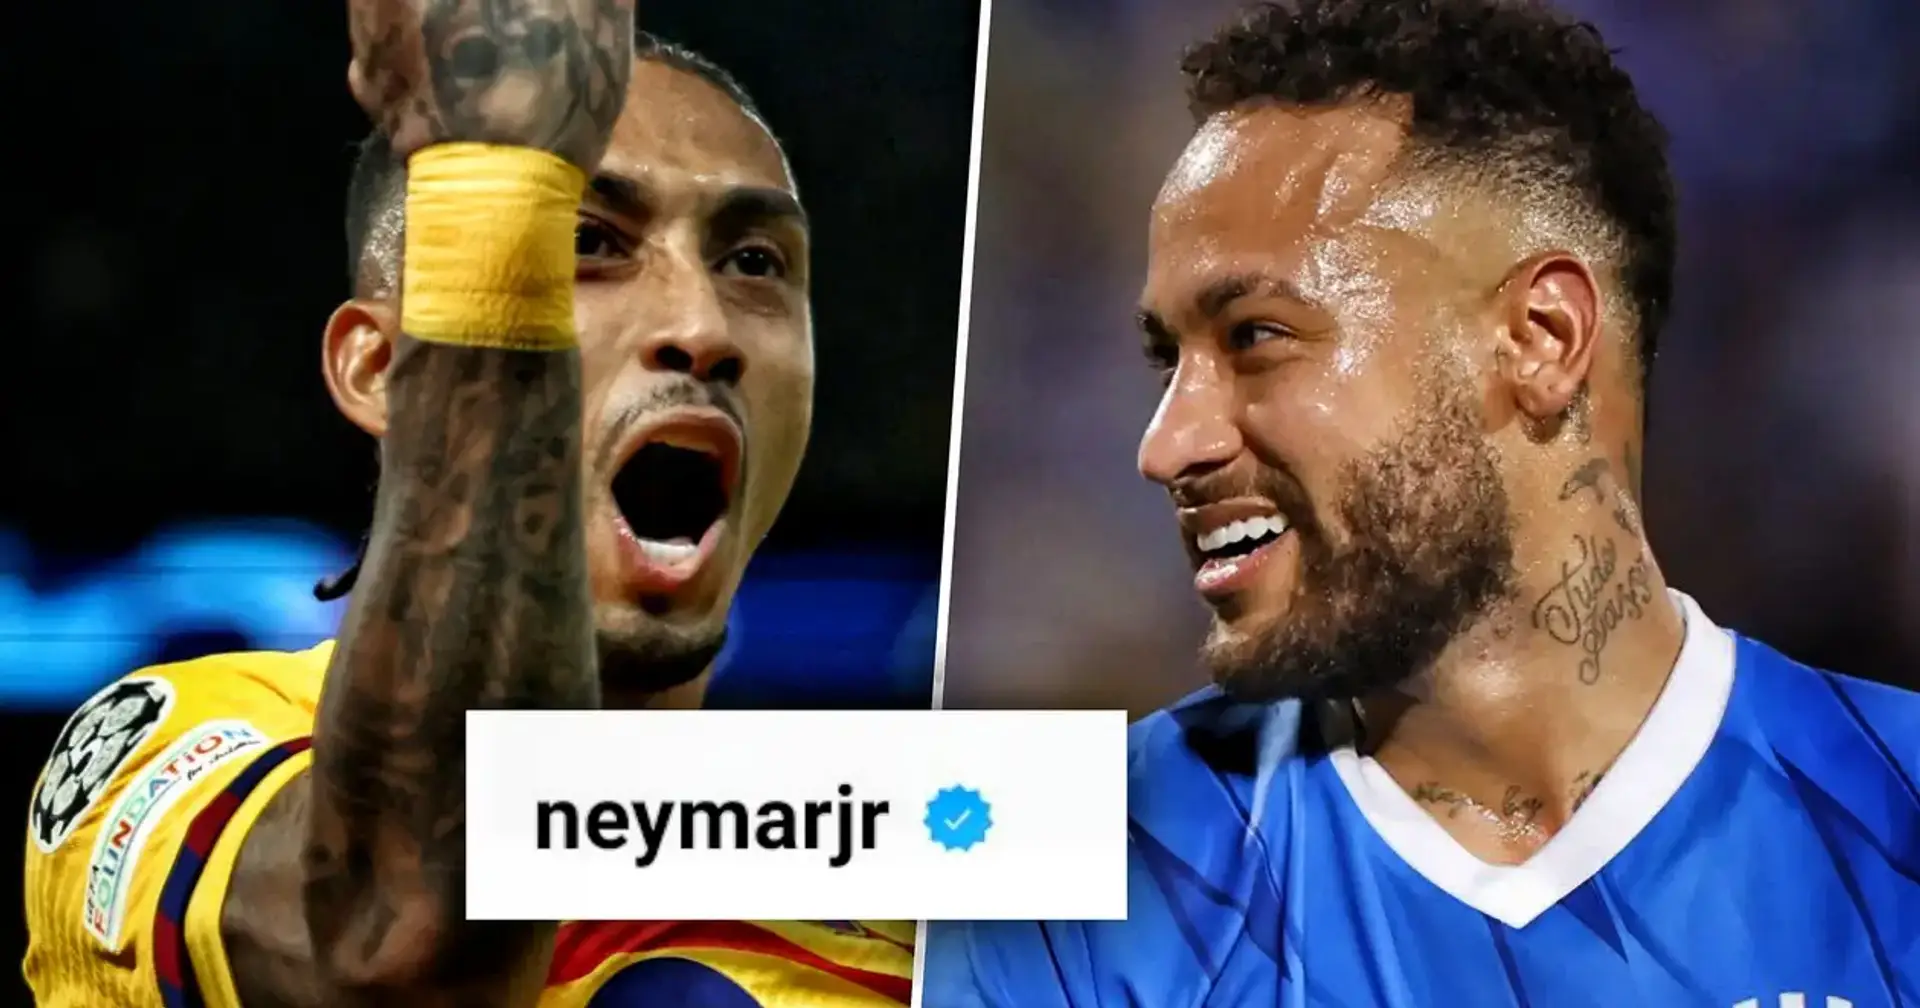 Neymar's comment collected 121 thousand likes under the post about Raphinha - what is the reason?